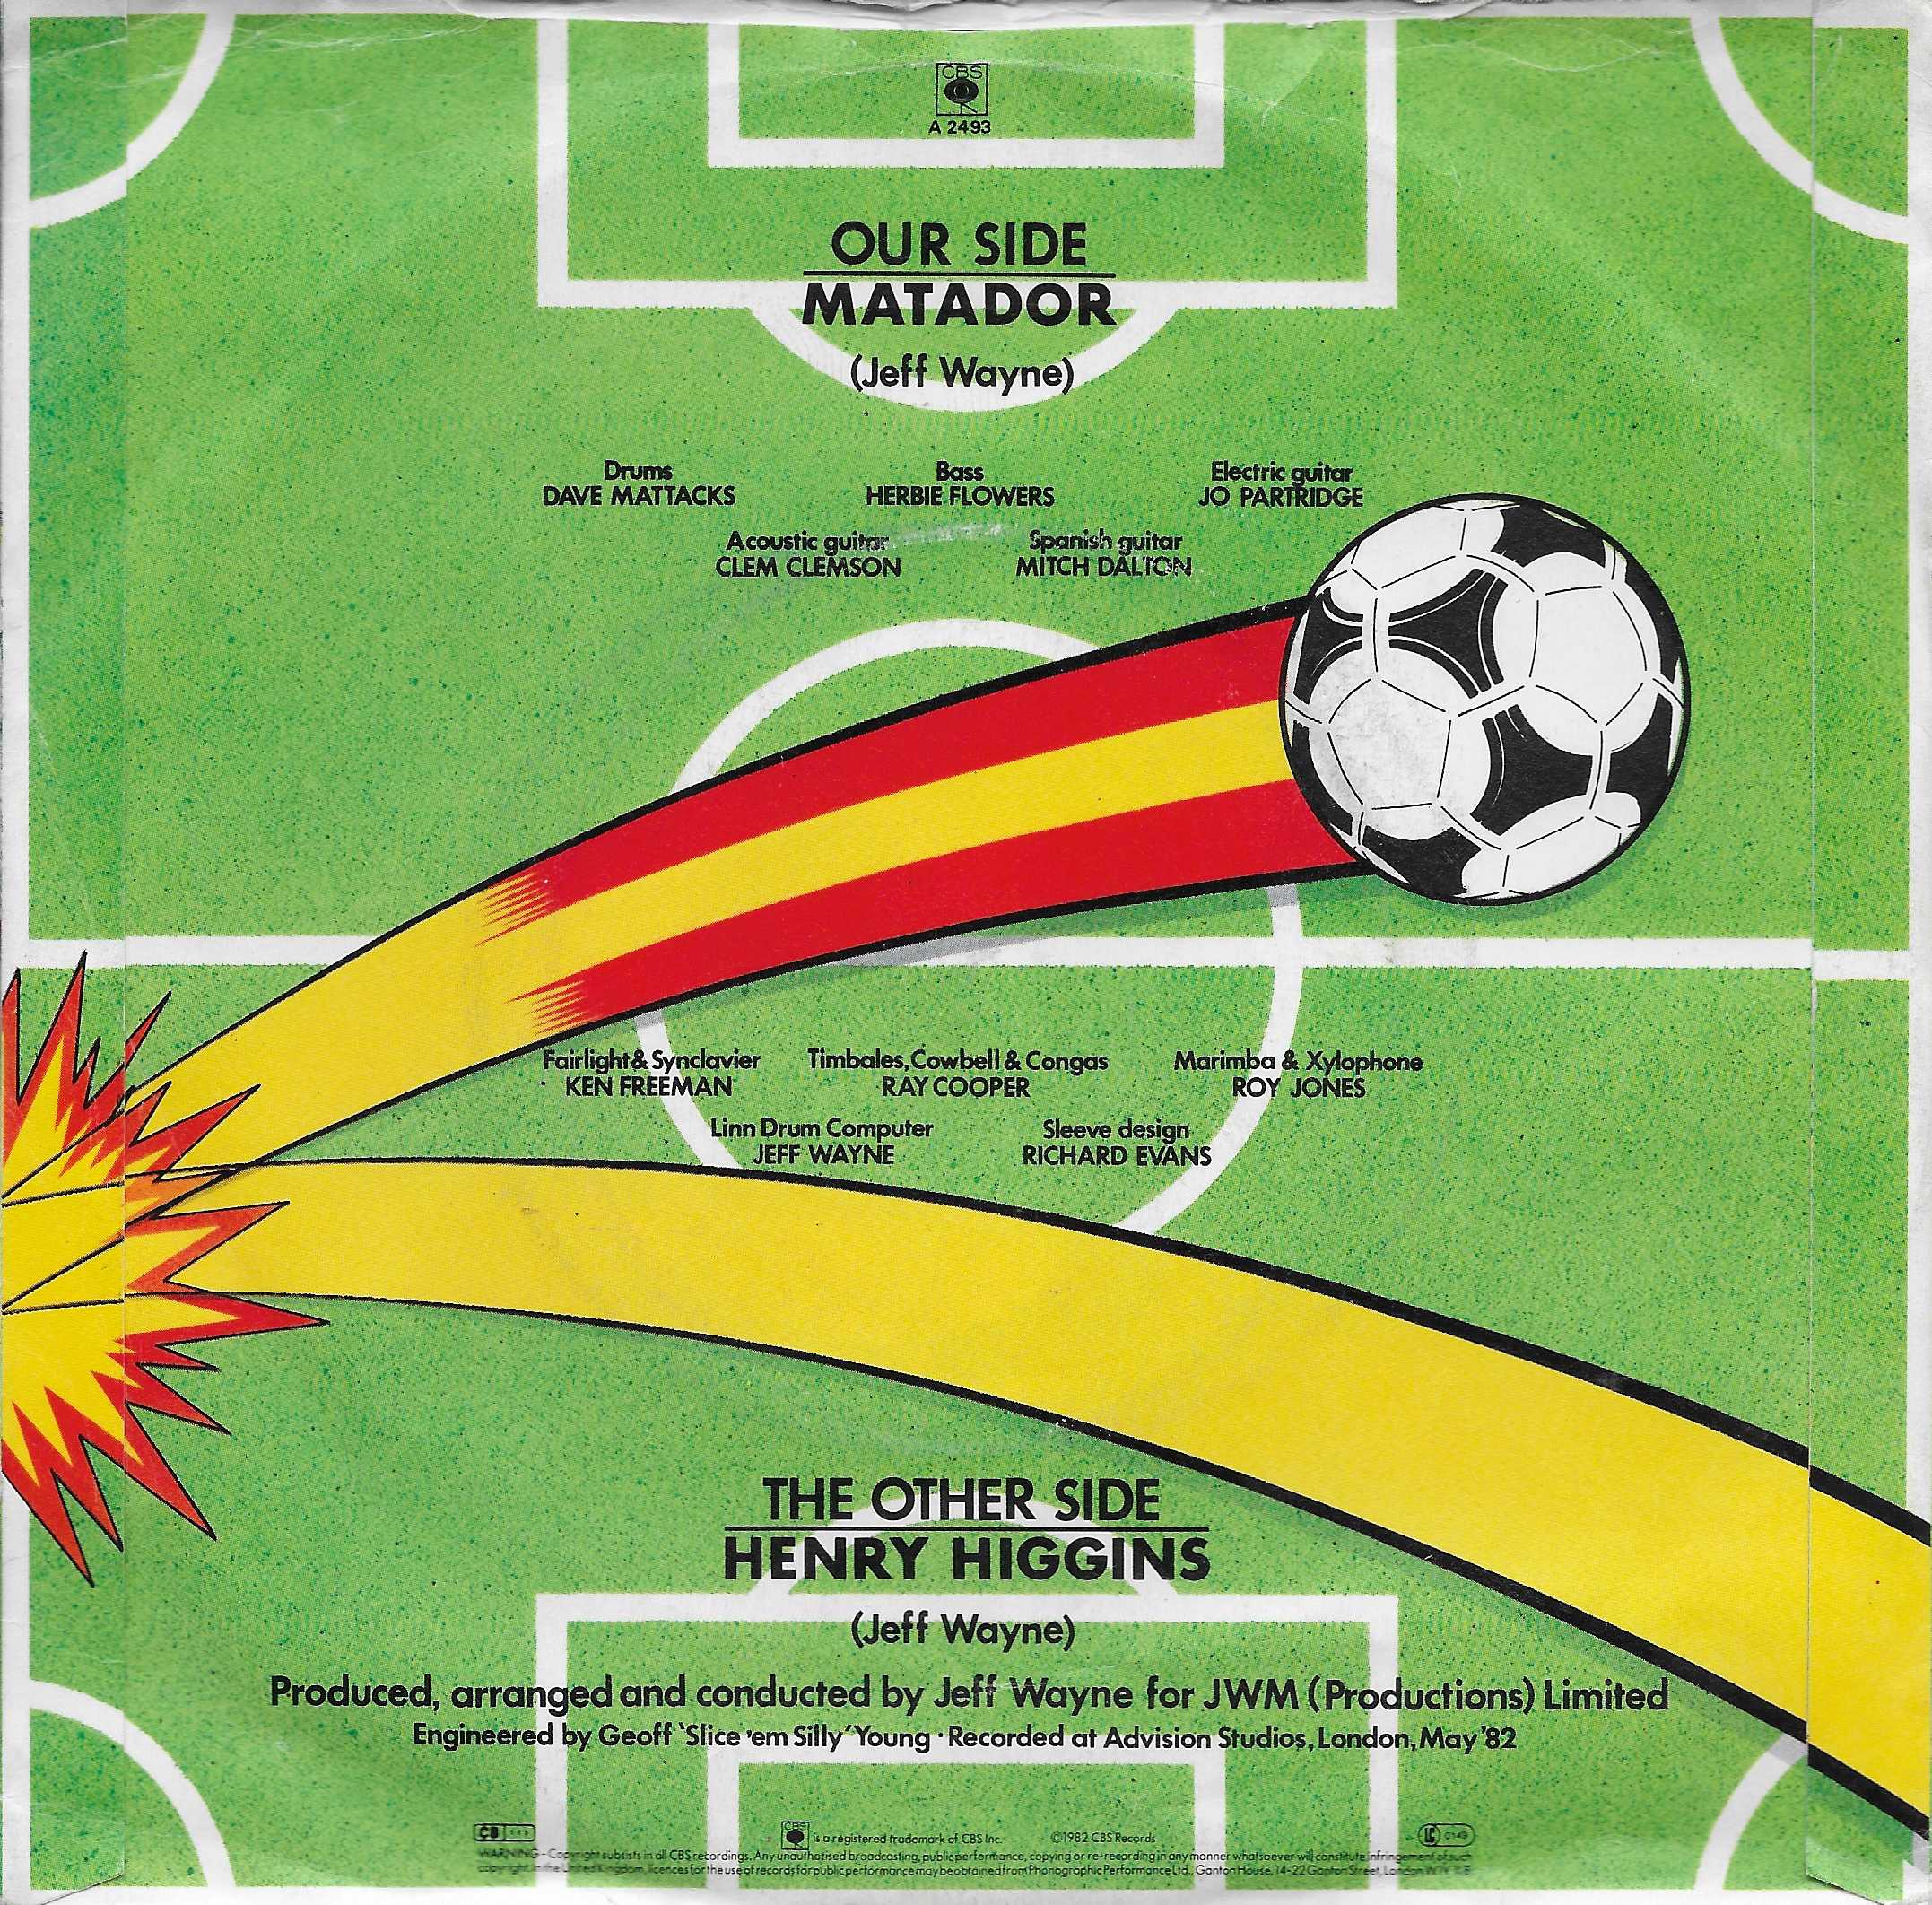 Picture of A 2493 P Matador (ITV World Cup theme (1982)) by artist Jeff Wayne from ITV, Channel 4 and Channel 5 library